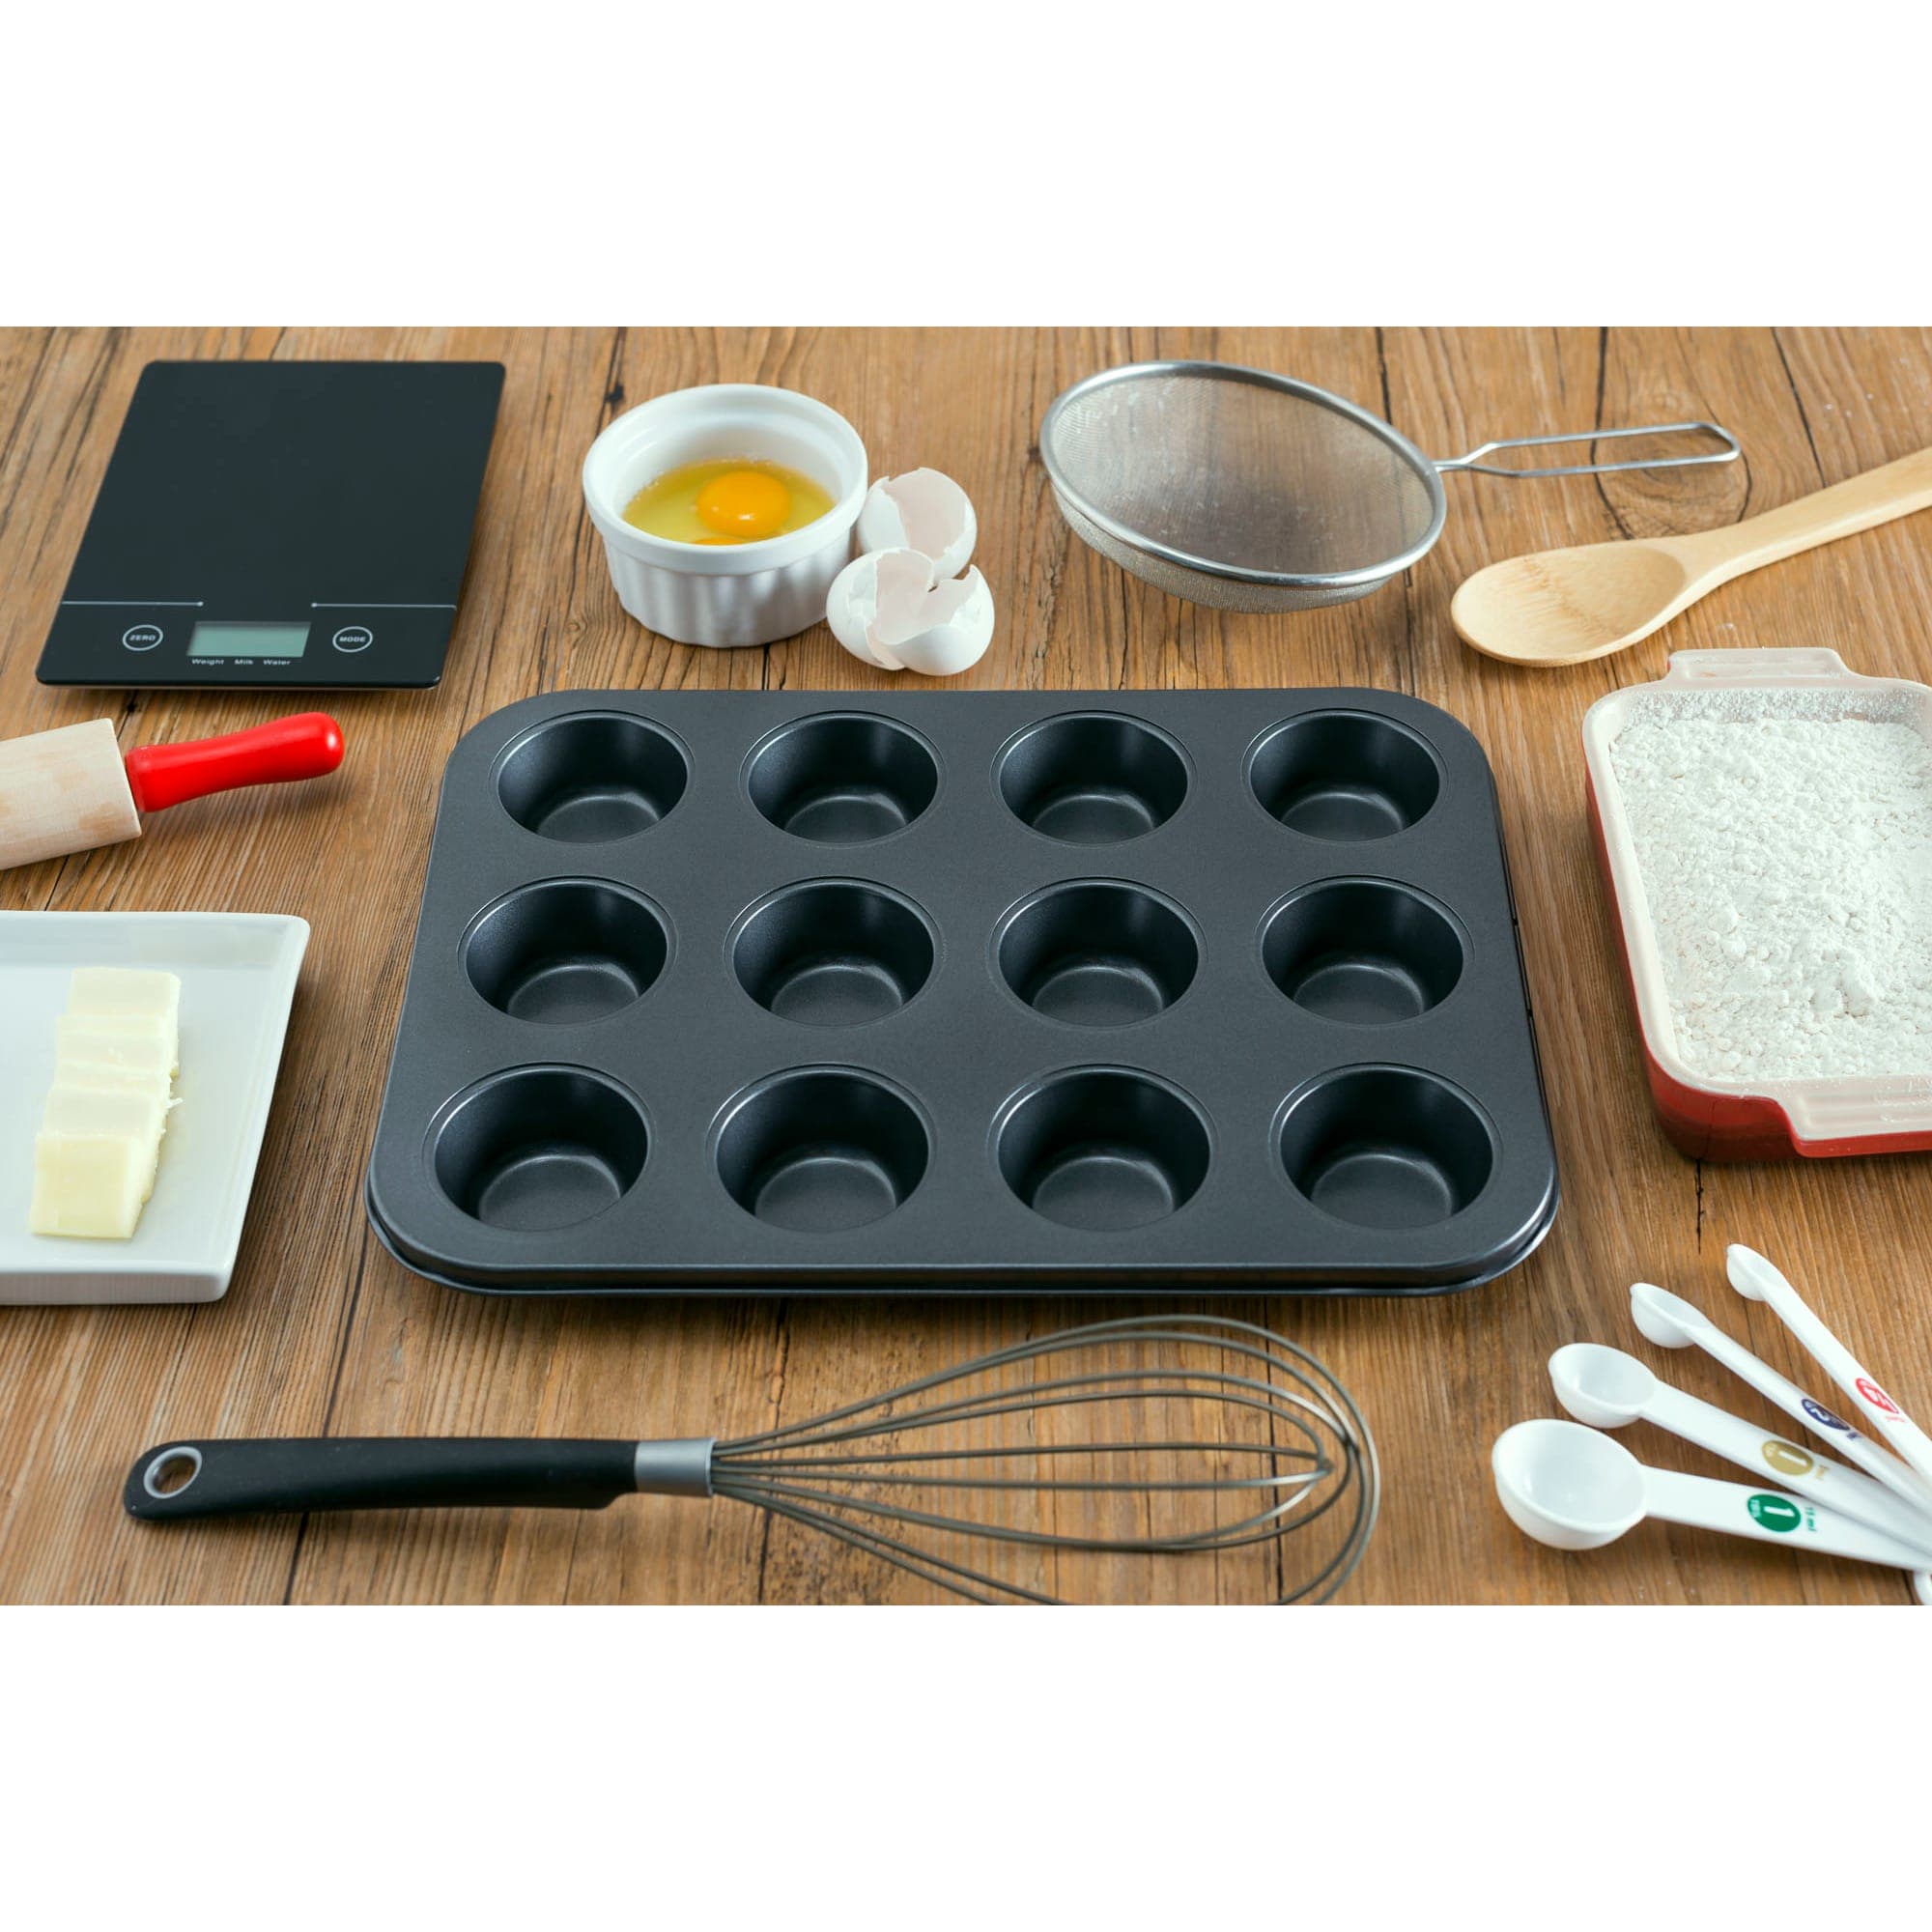 Home Basics Non-Stick 12 Cup Muffin Pan $6.00 EACH, CASE PACK OF 24